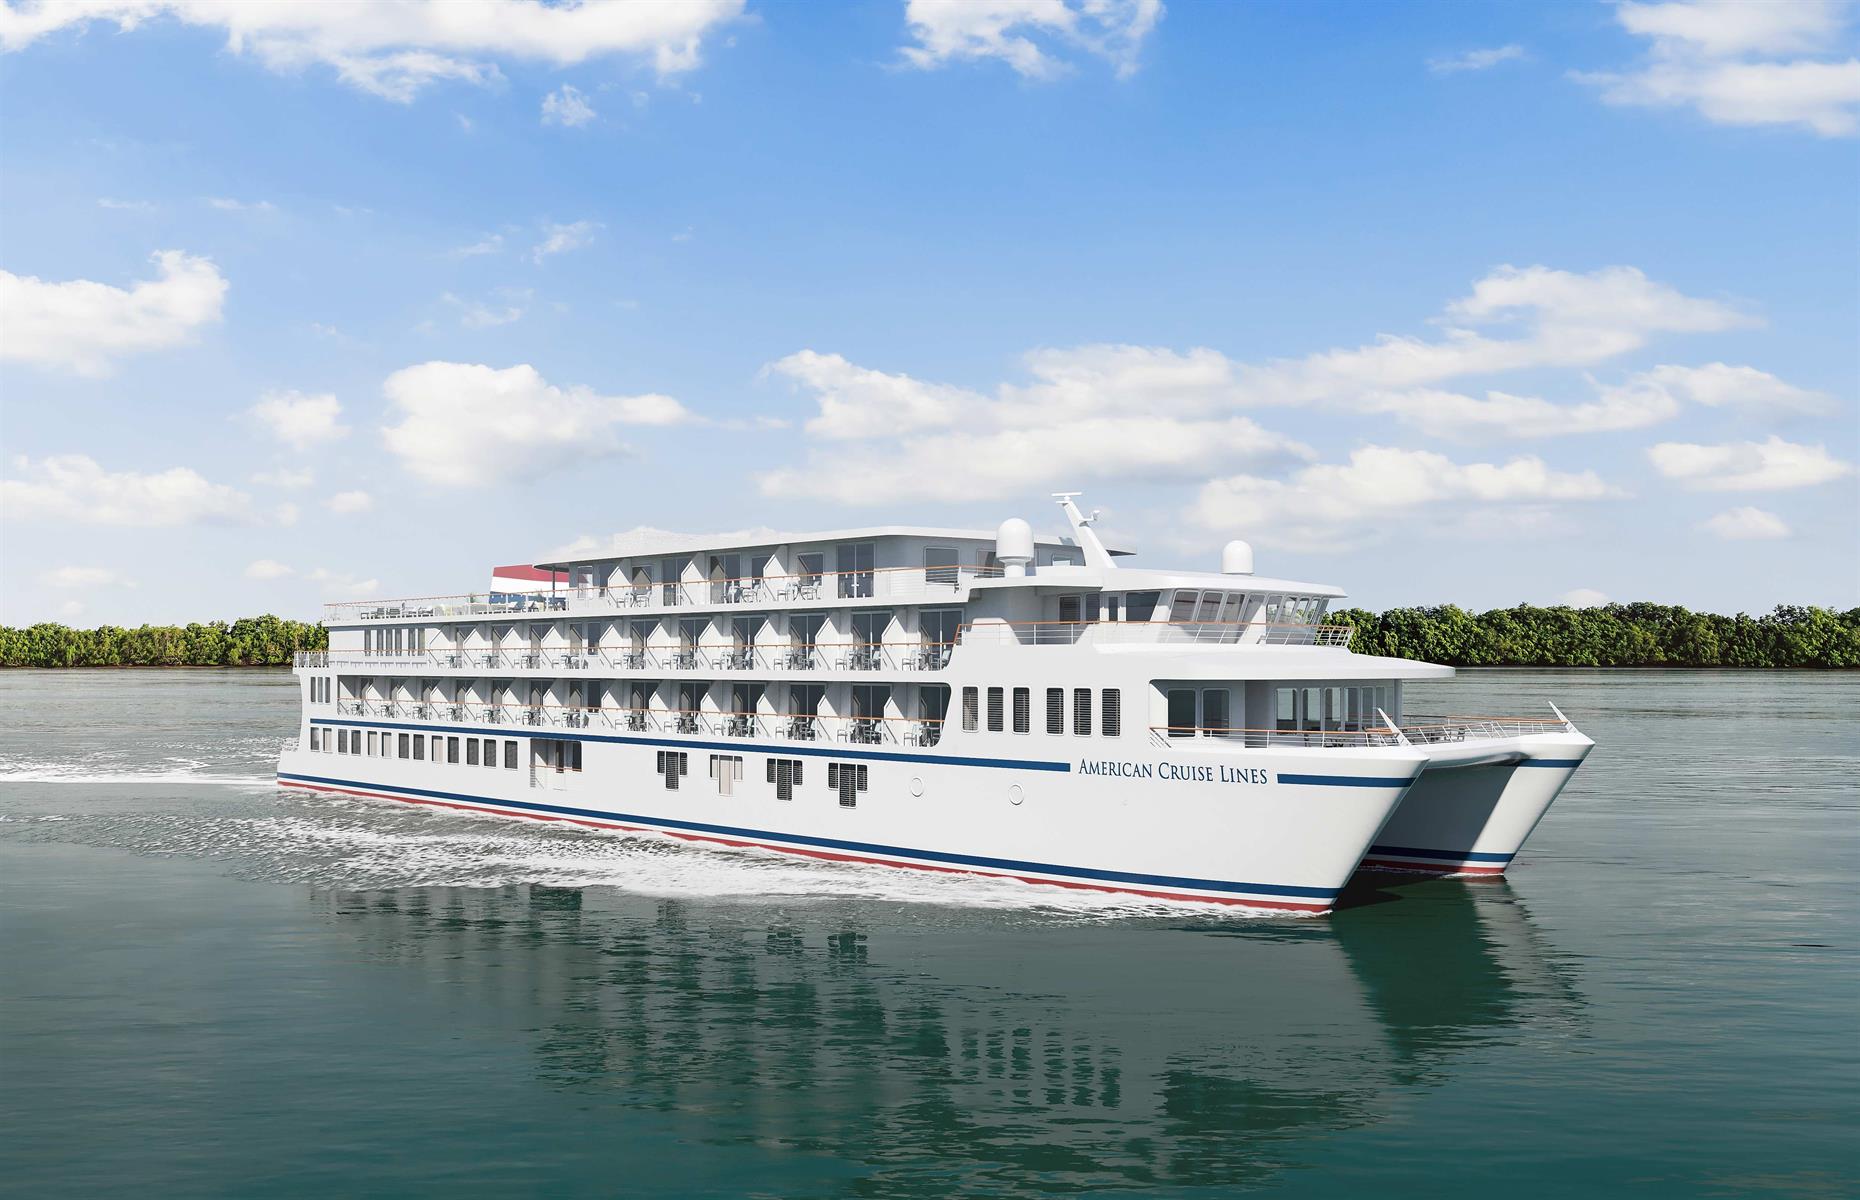 <p>There will be just 100 guests on American Liberty, a compact vessel which American Cruise Lines says will offer expedition-style river sailing, thanks to its ability to slip into smaller ports. Every cabin will have a balcony, and it will have one particularly cool amenity – an activity platform at the stern of the boat designed for passengers who fancy a watersports session, or (if the weather allows) a dip in whichever river it's floating down.</p>